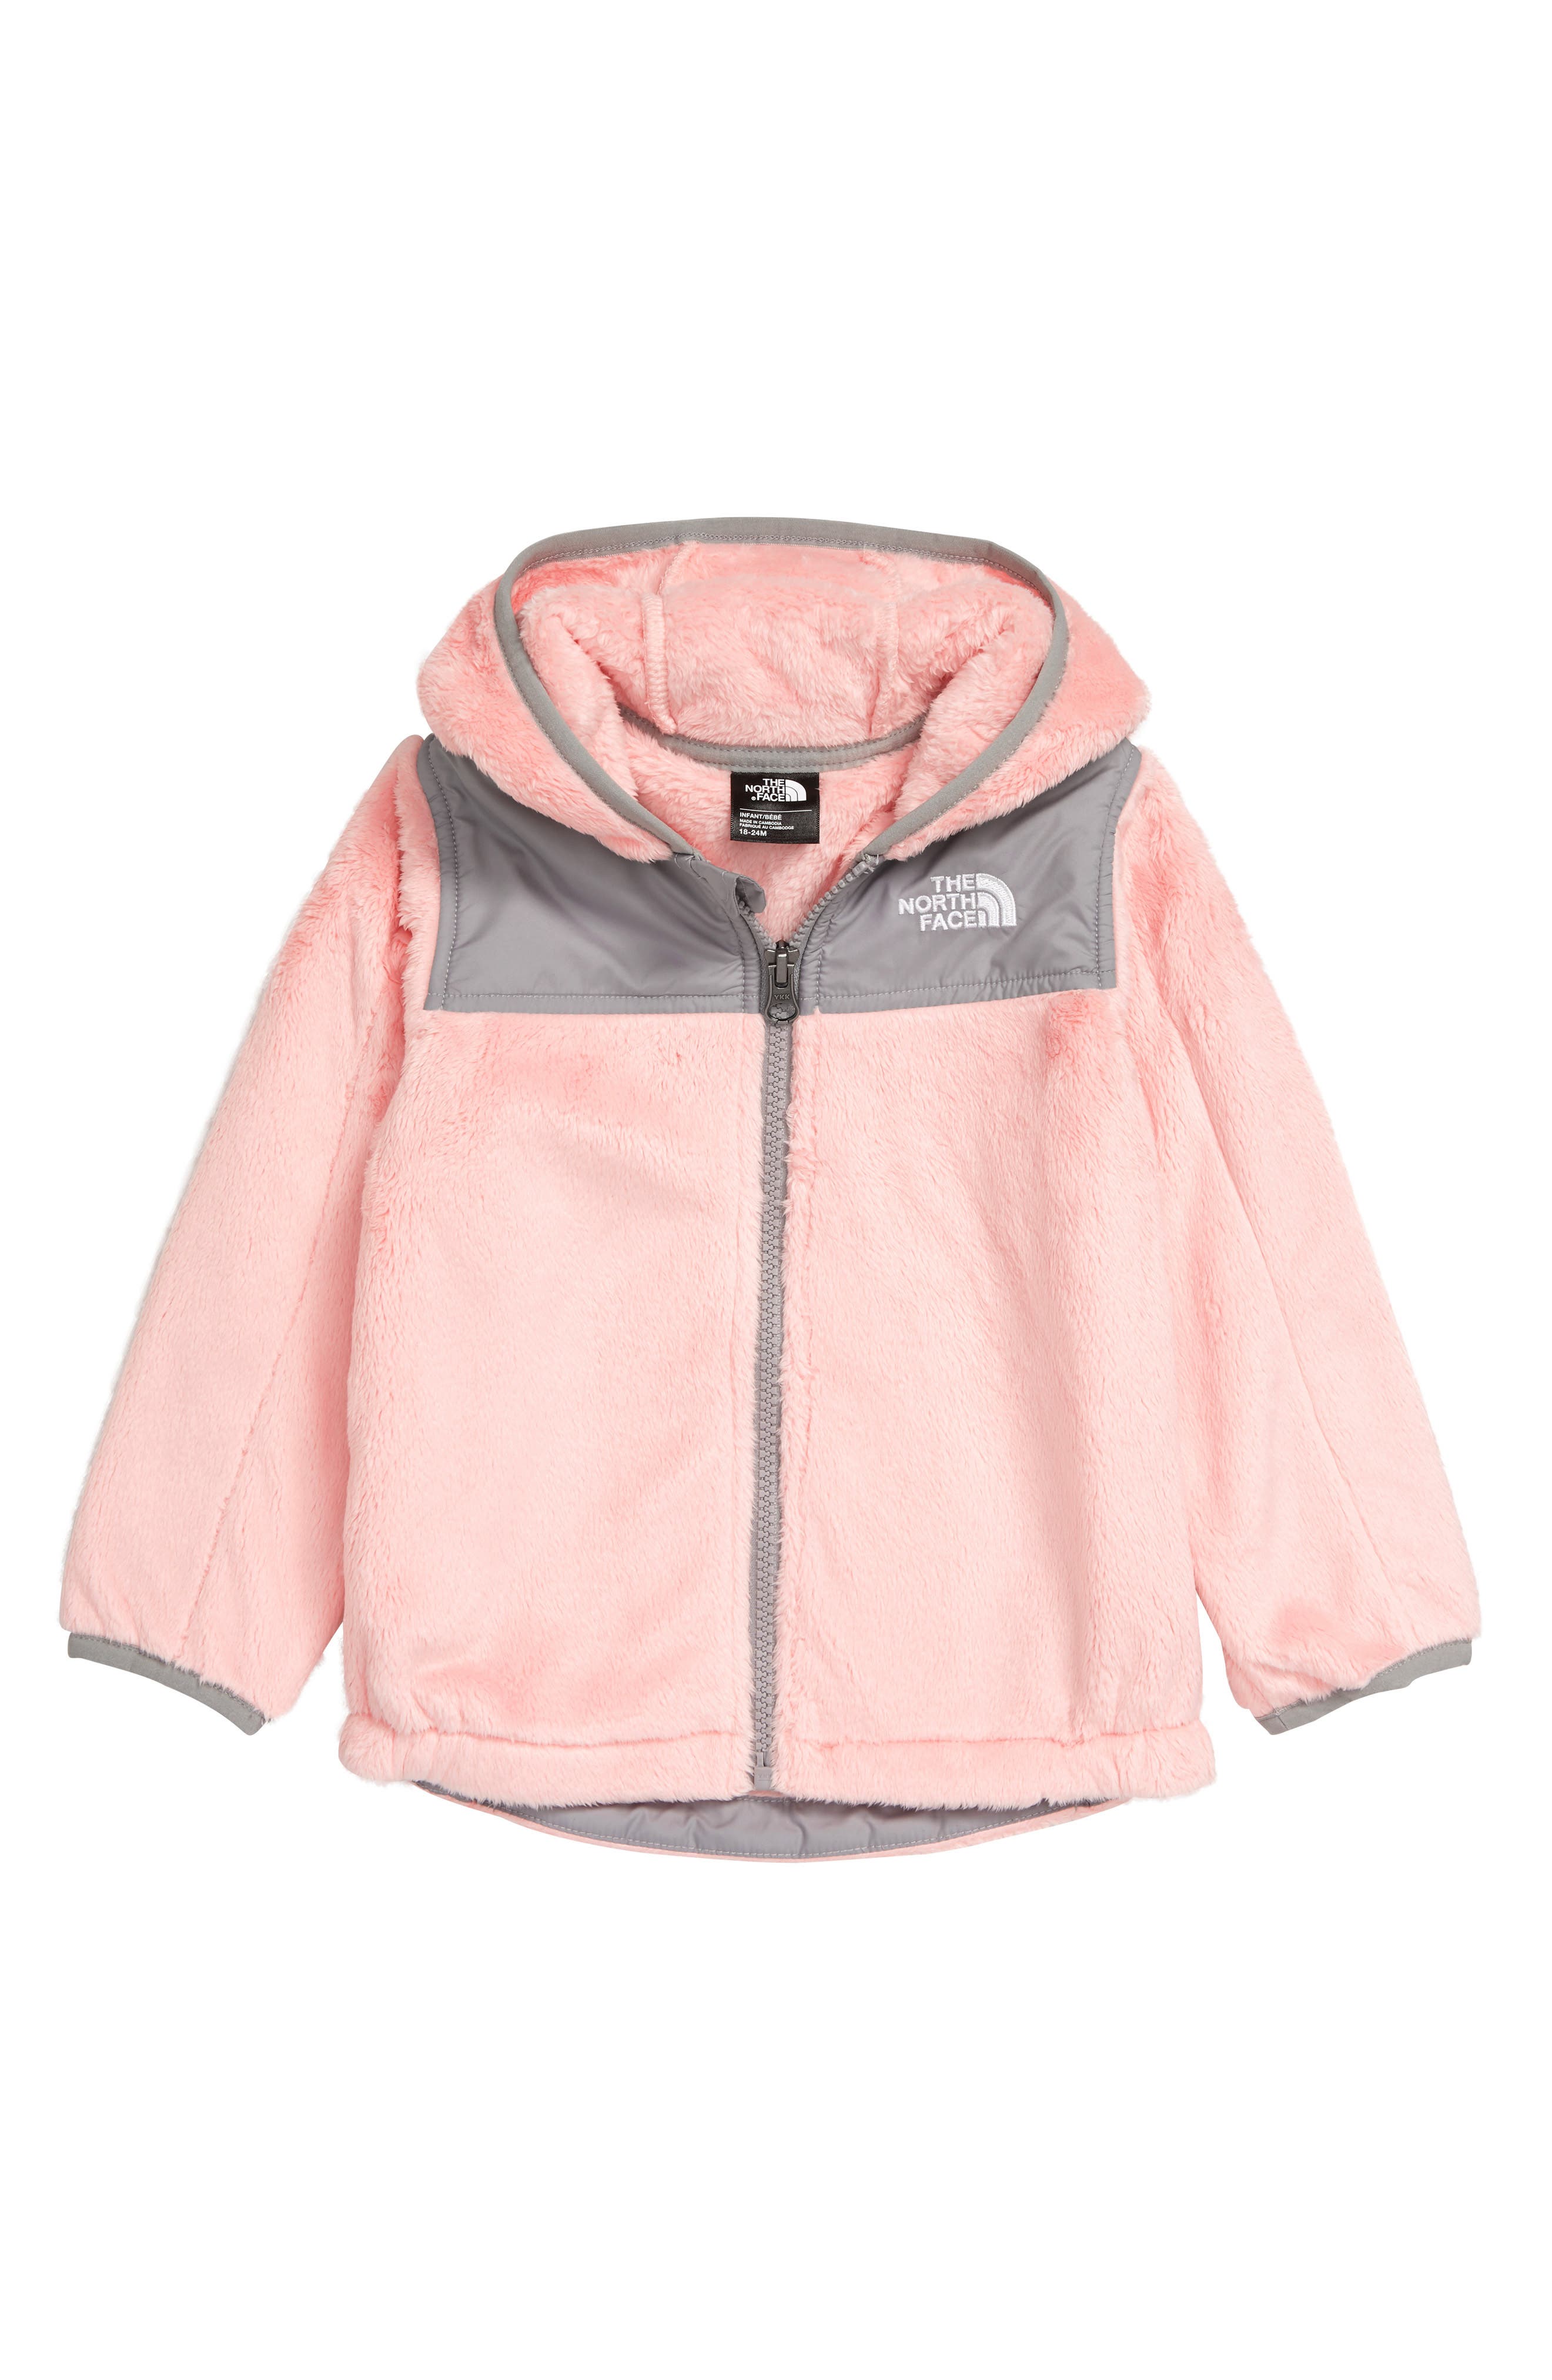 Baby Girls' The North Face Clothing 